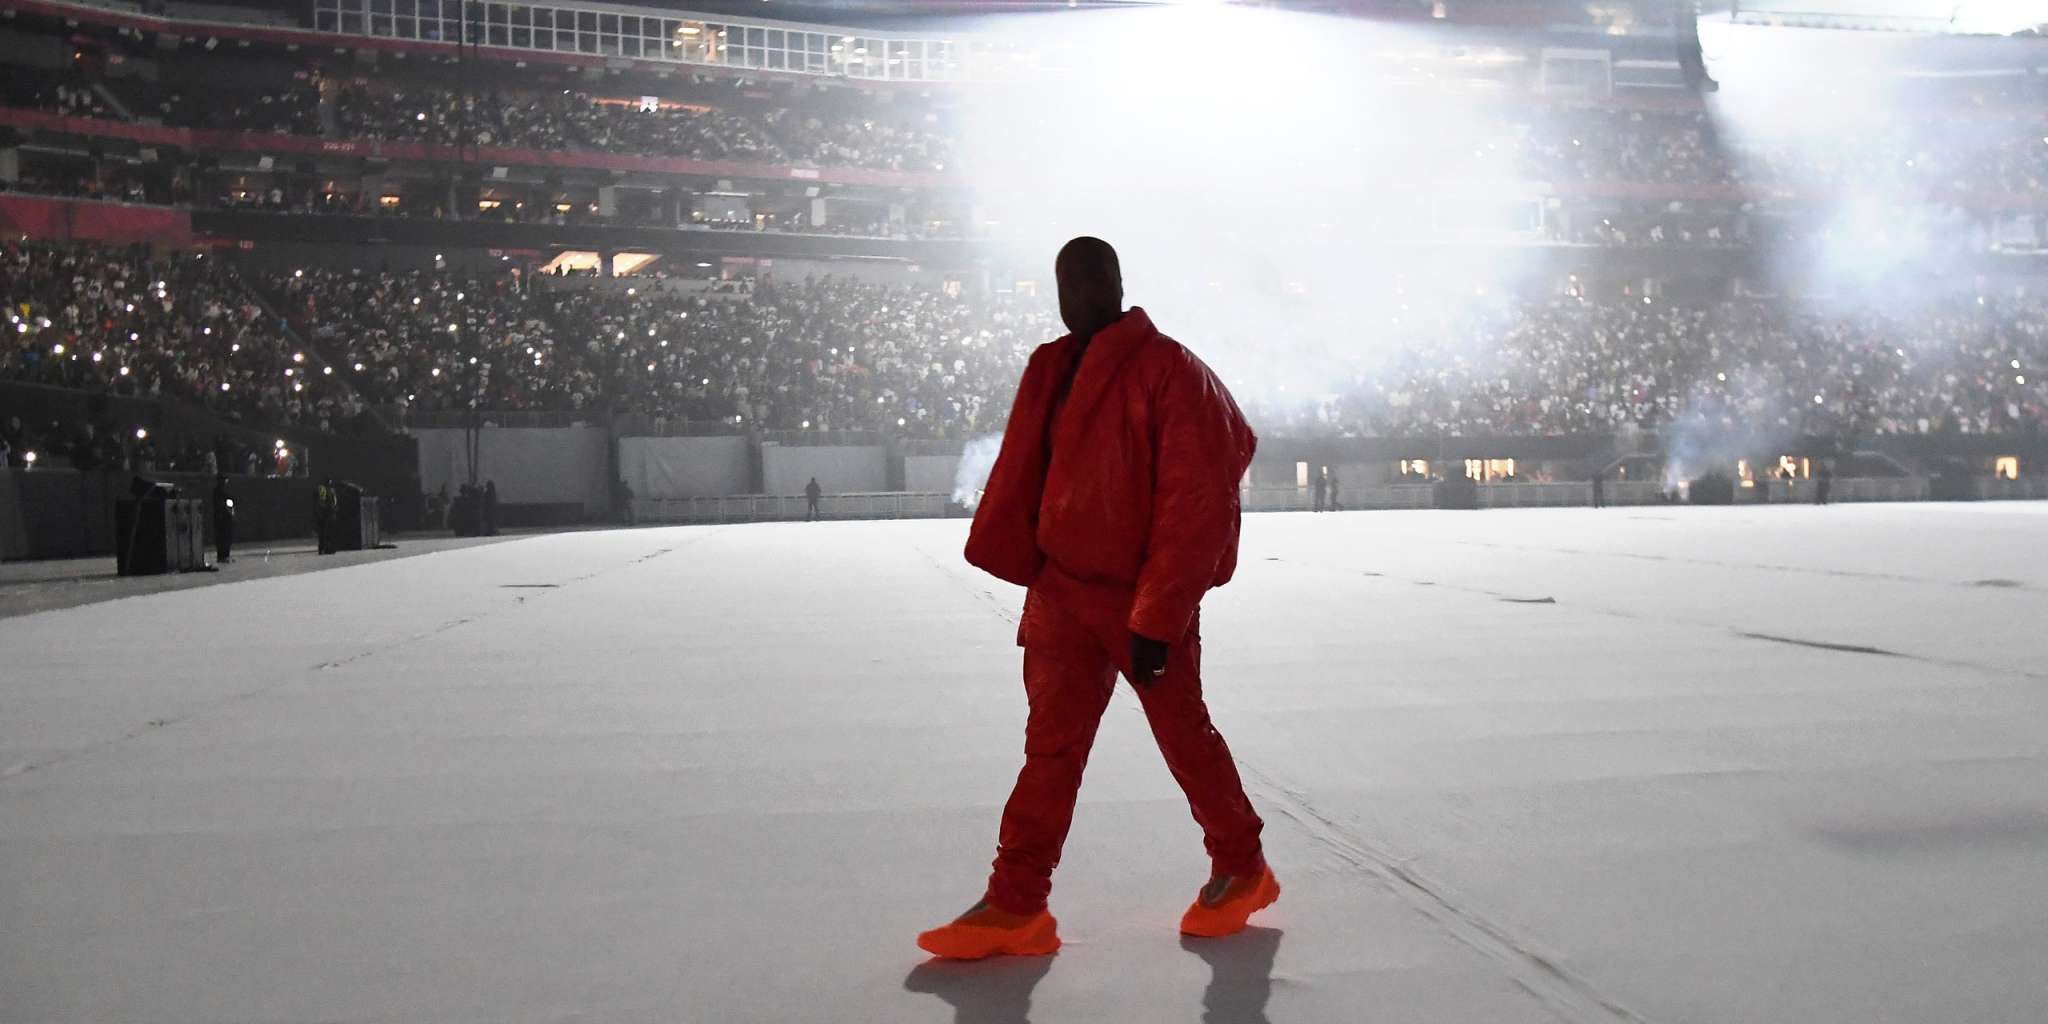 kanye-west-breaks-apple-music-live-streaming-record-for-donda